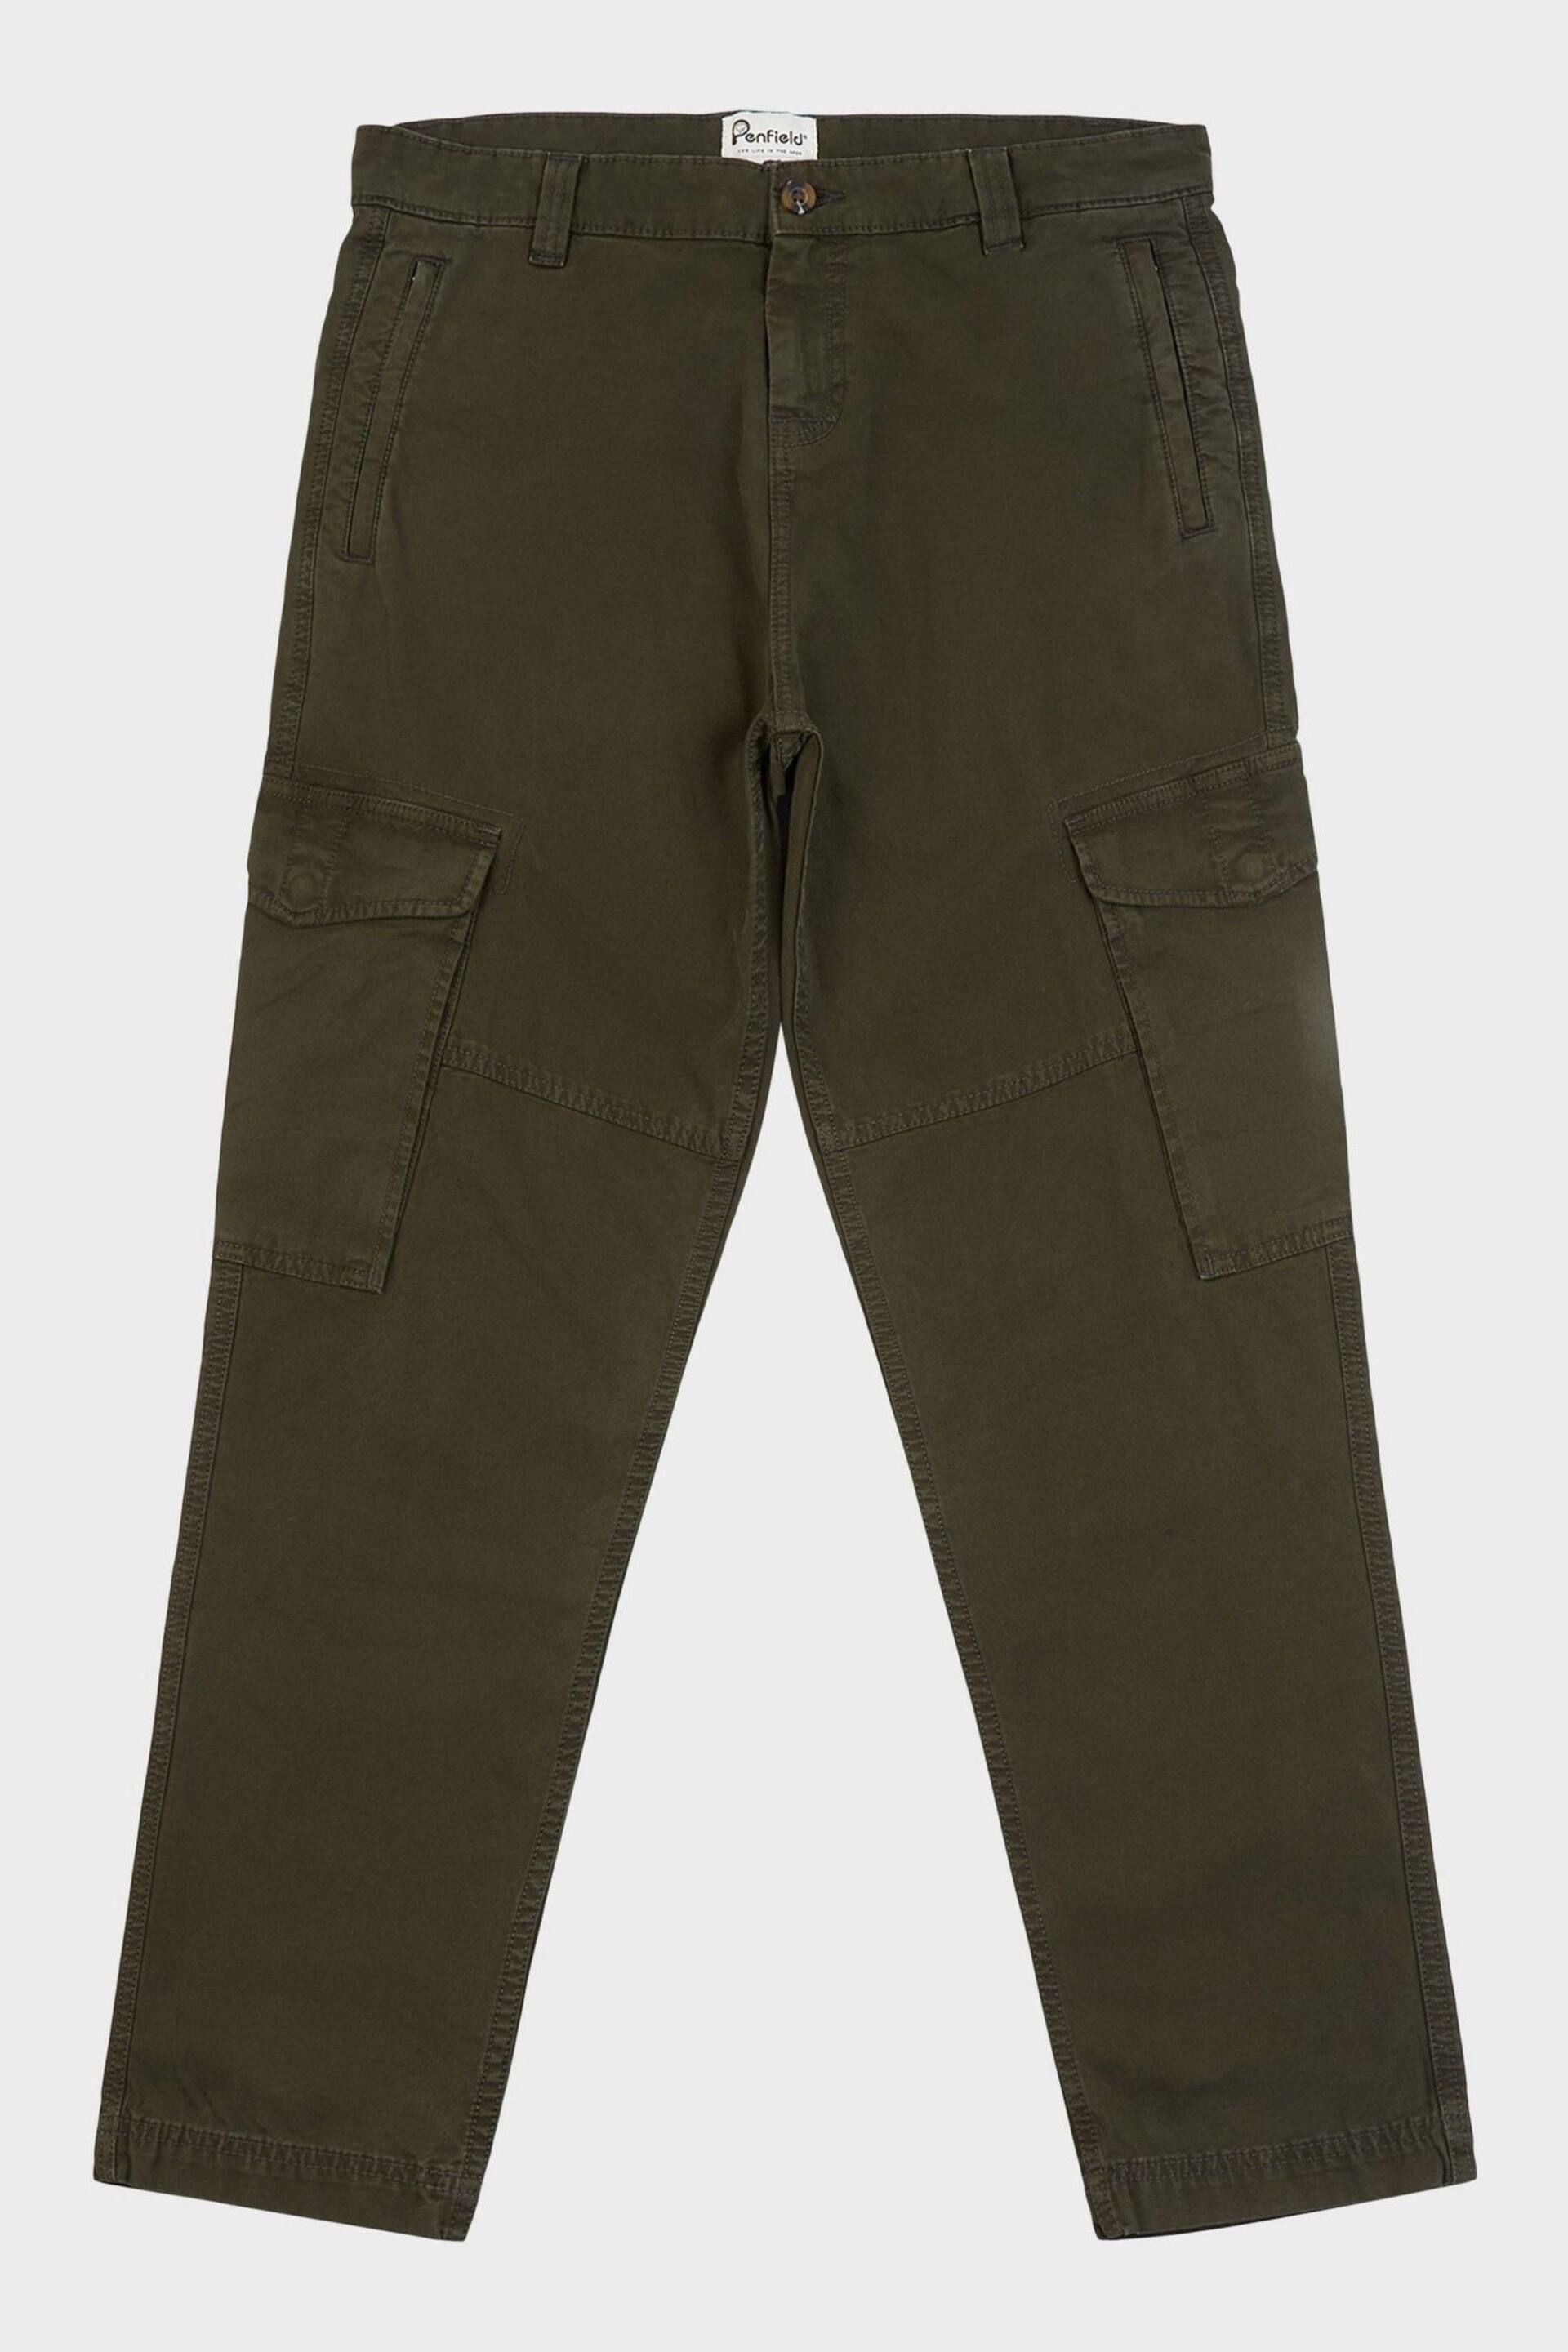 Penfield Green Bear Cargo Trousers - Image 6 of 7